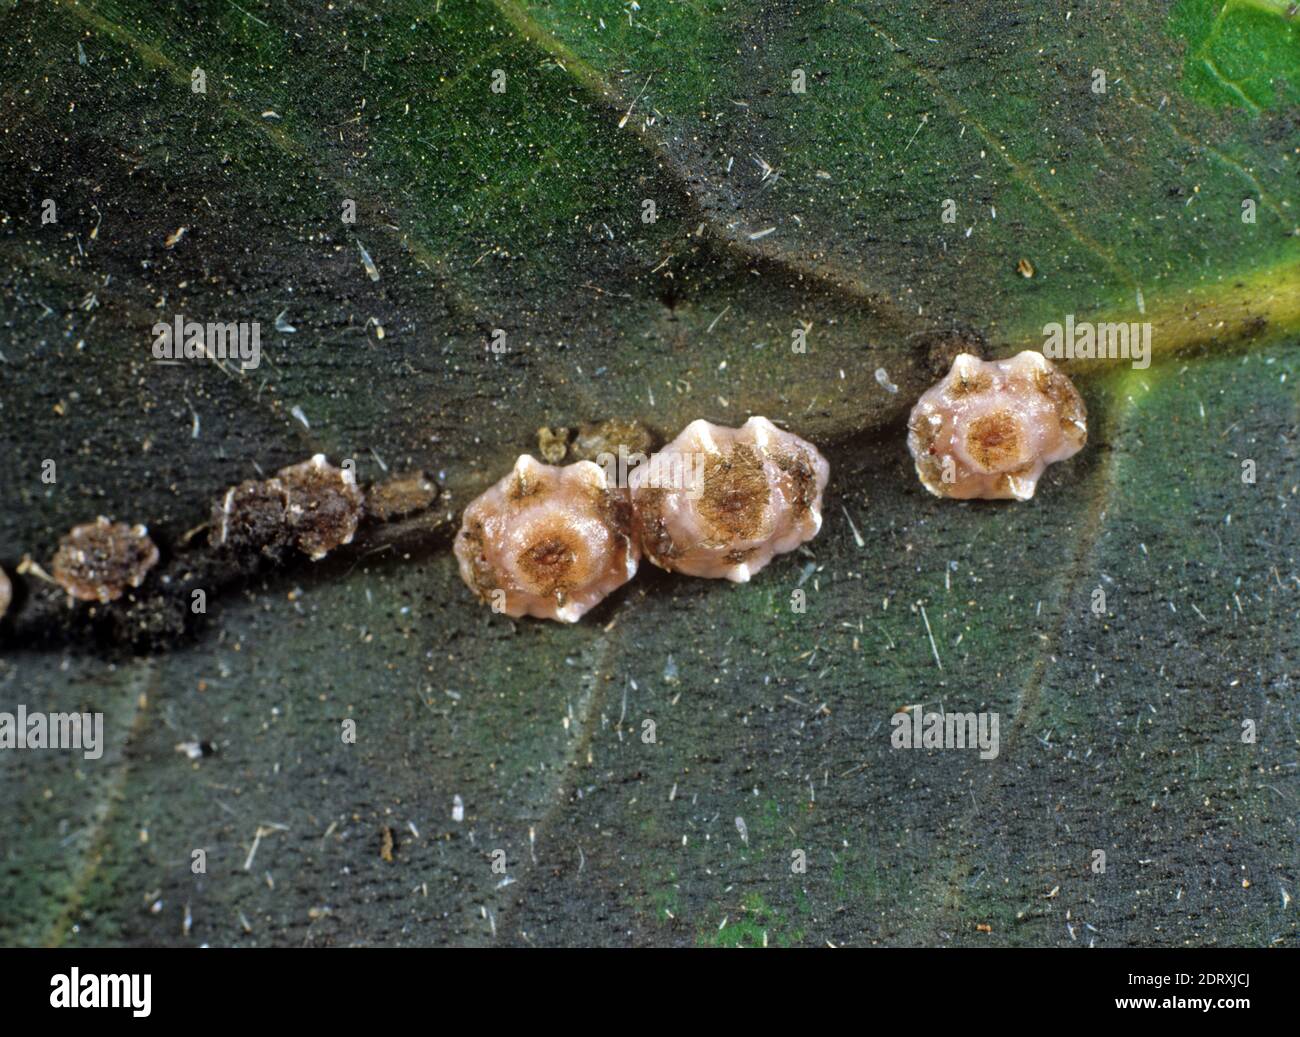 Wax scale insect (Ceroplastes spp.) adults and immatures along the midrib of a mango leaf, Thailand Stock Photo